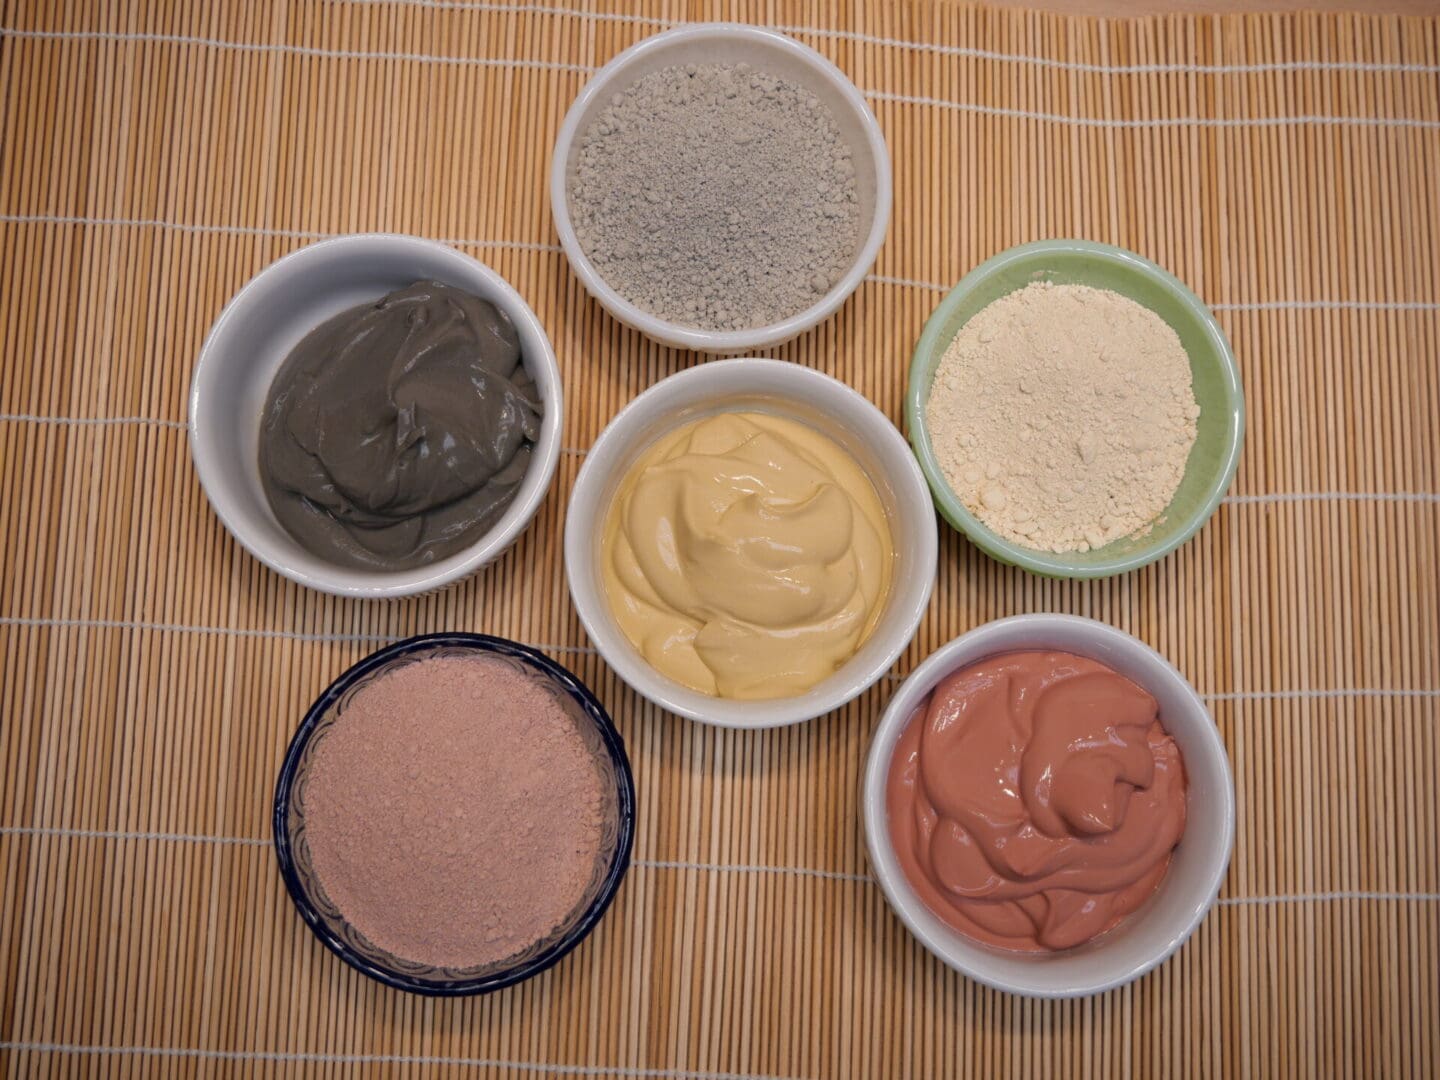 Five bowls of different colored powders, including a French Pink Clay Face Mask Powder for Dry, Sensitive Skin, on a bamboo mat.